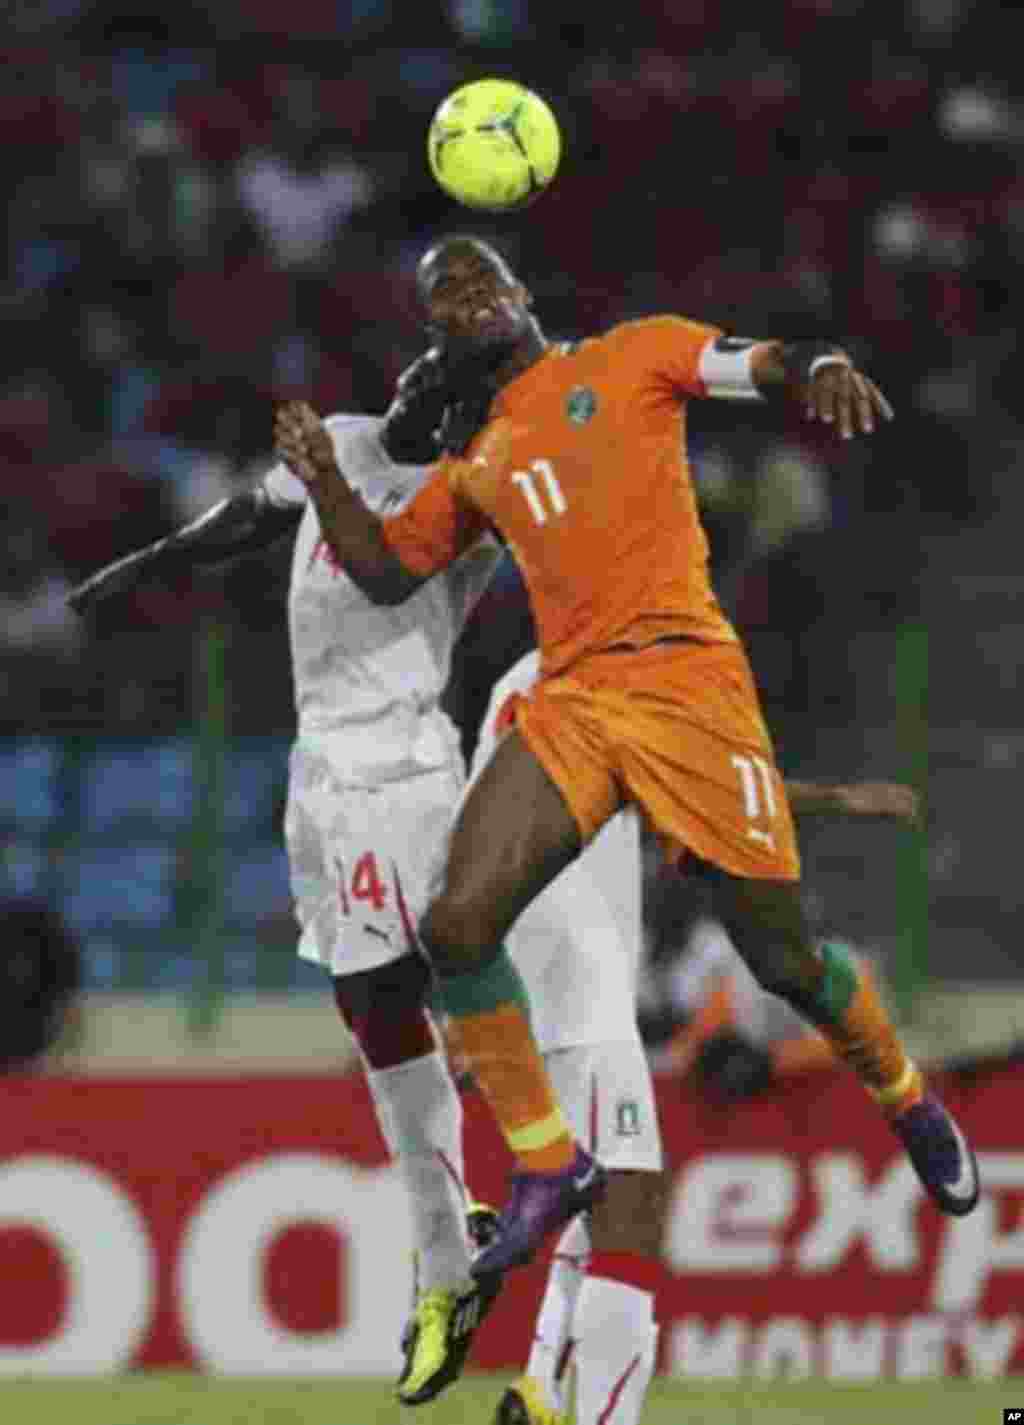 Didier Drogba (R) of Ivory Coast fights for the ball with Ben Konate of Equatorial Guinea during their quarter-final match at the African Nations Cup soccer tournament in Malabo February 4, 2012.